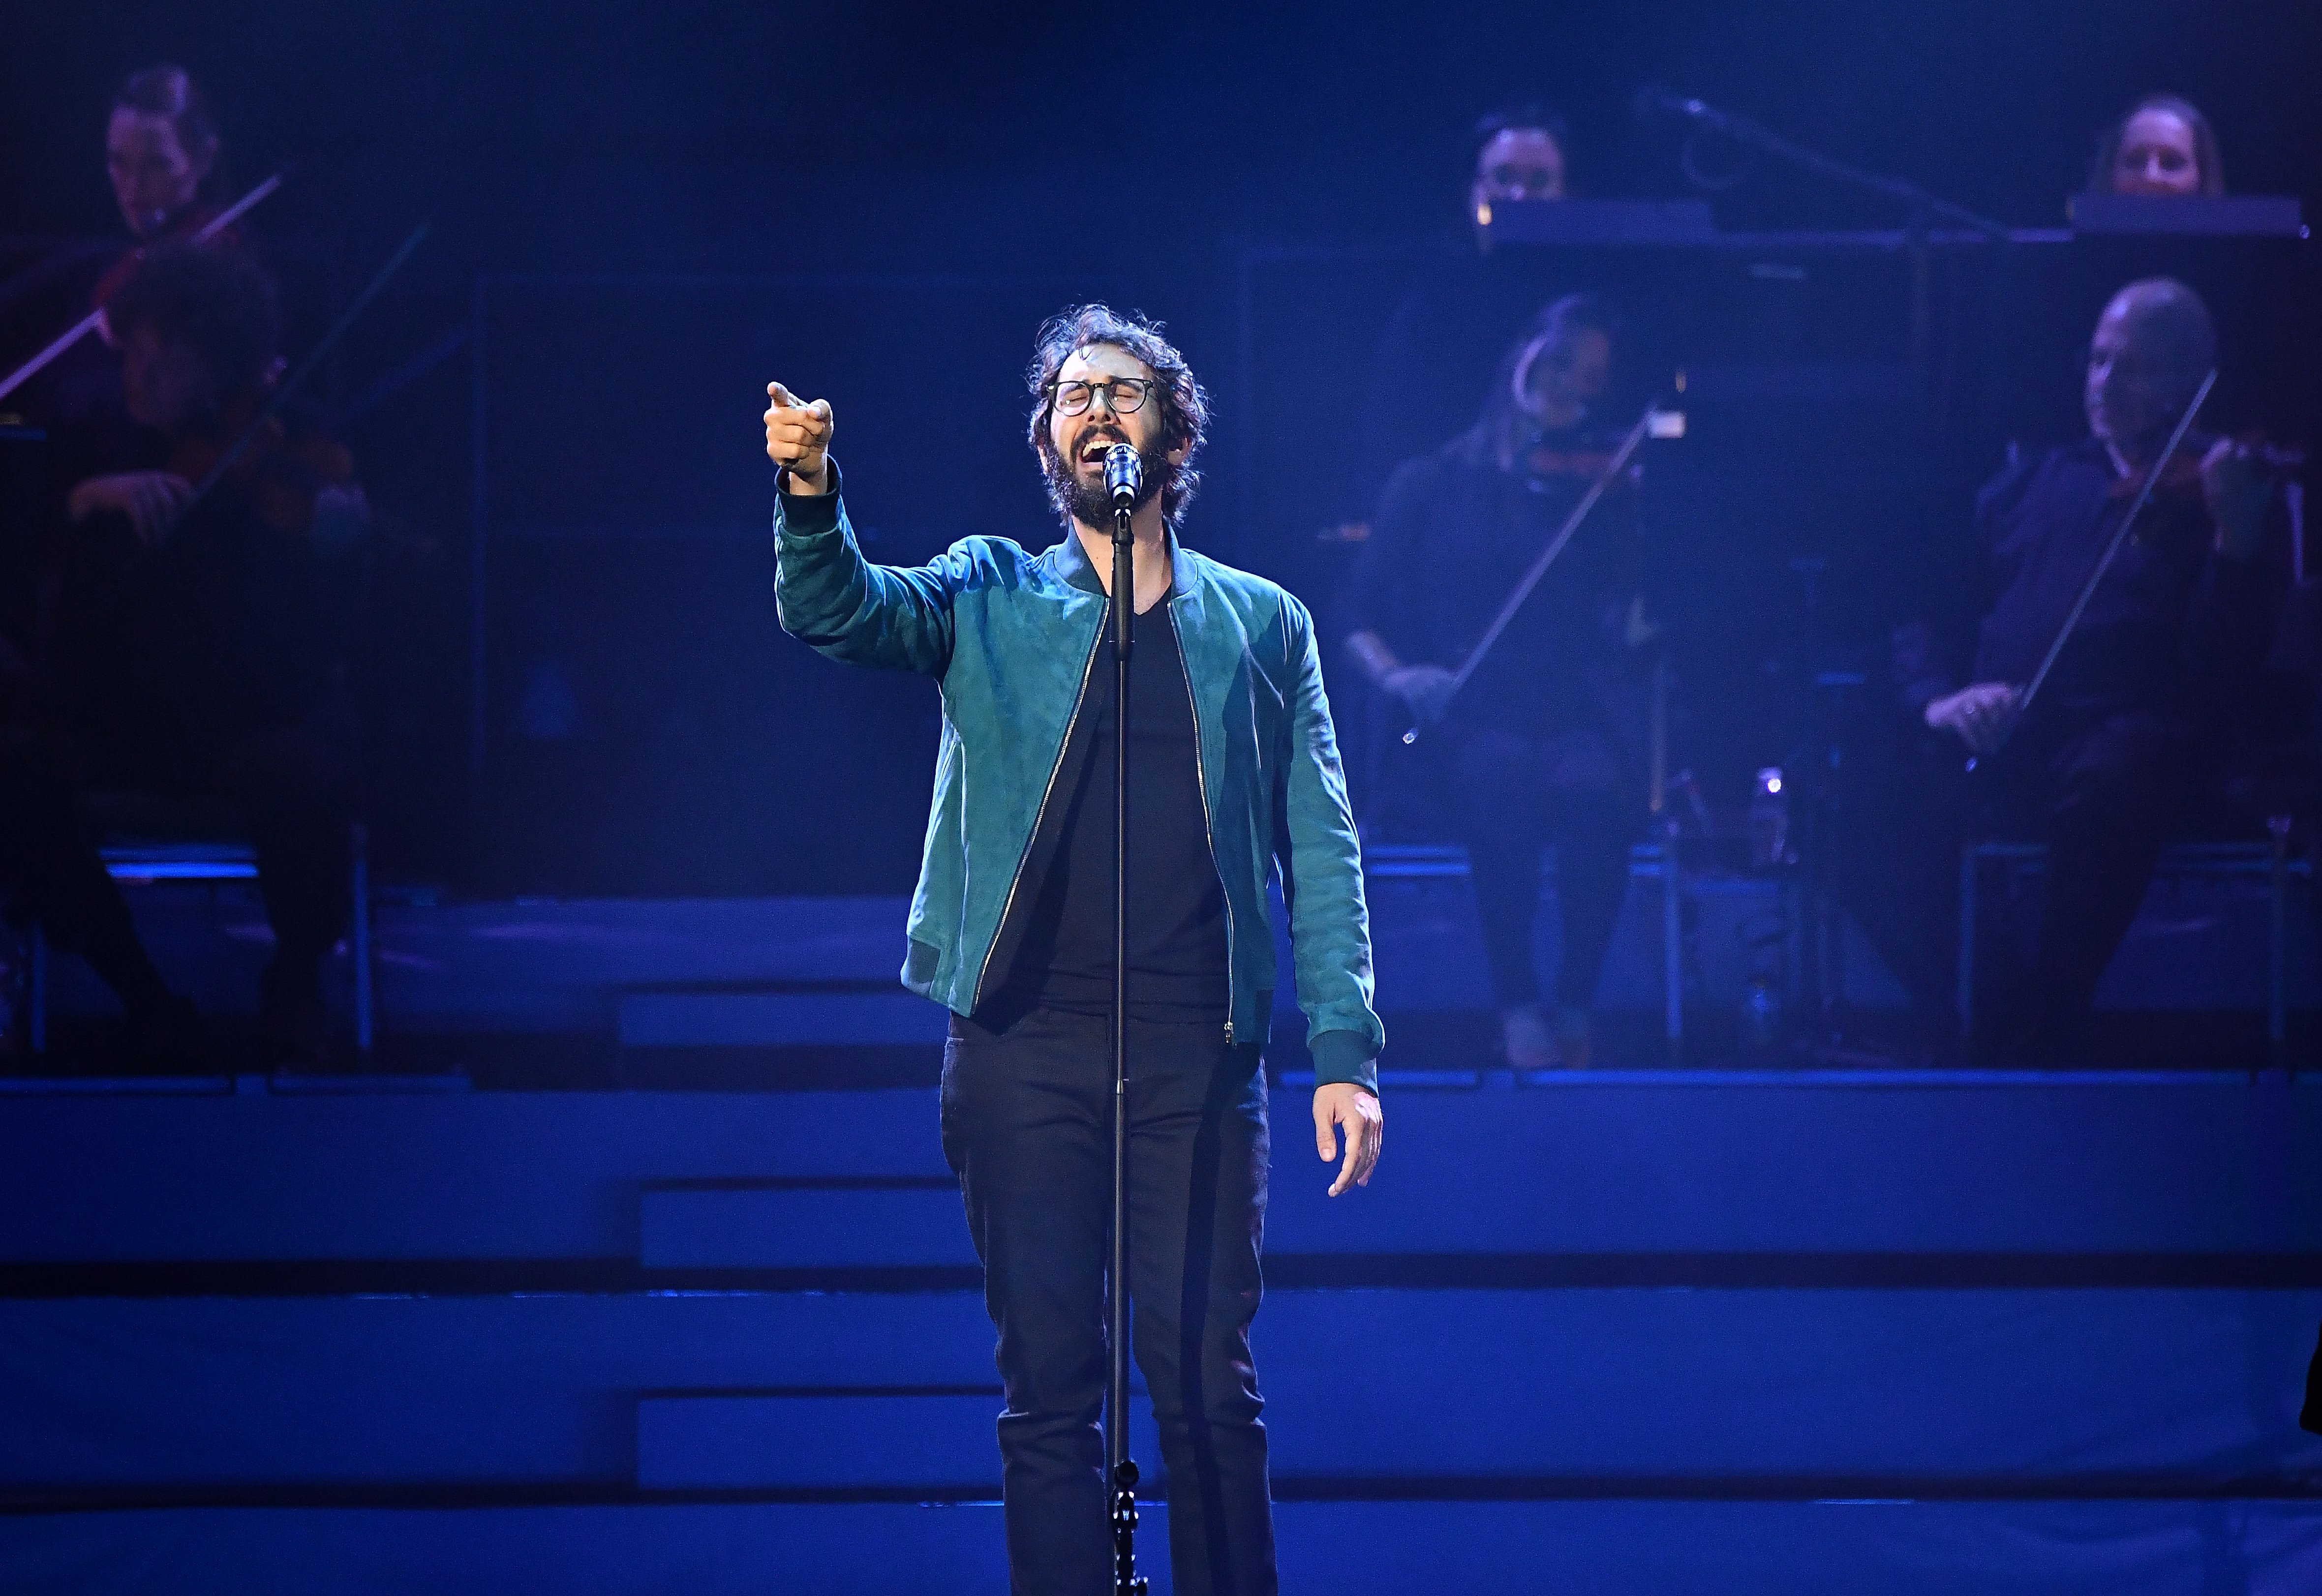  Josh Groban performs onstage during his "The Bridges" tour opener at Infinite Energy Arena on October 18, 2018 | Photo: Getty Images